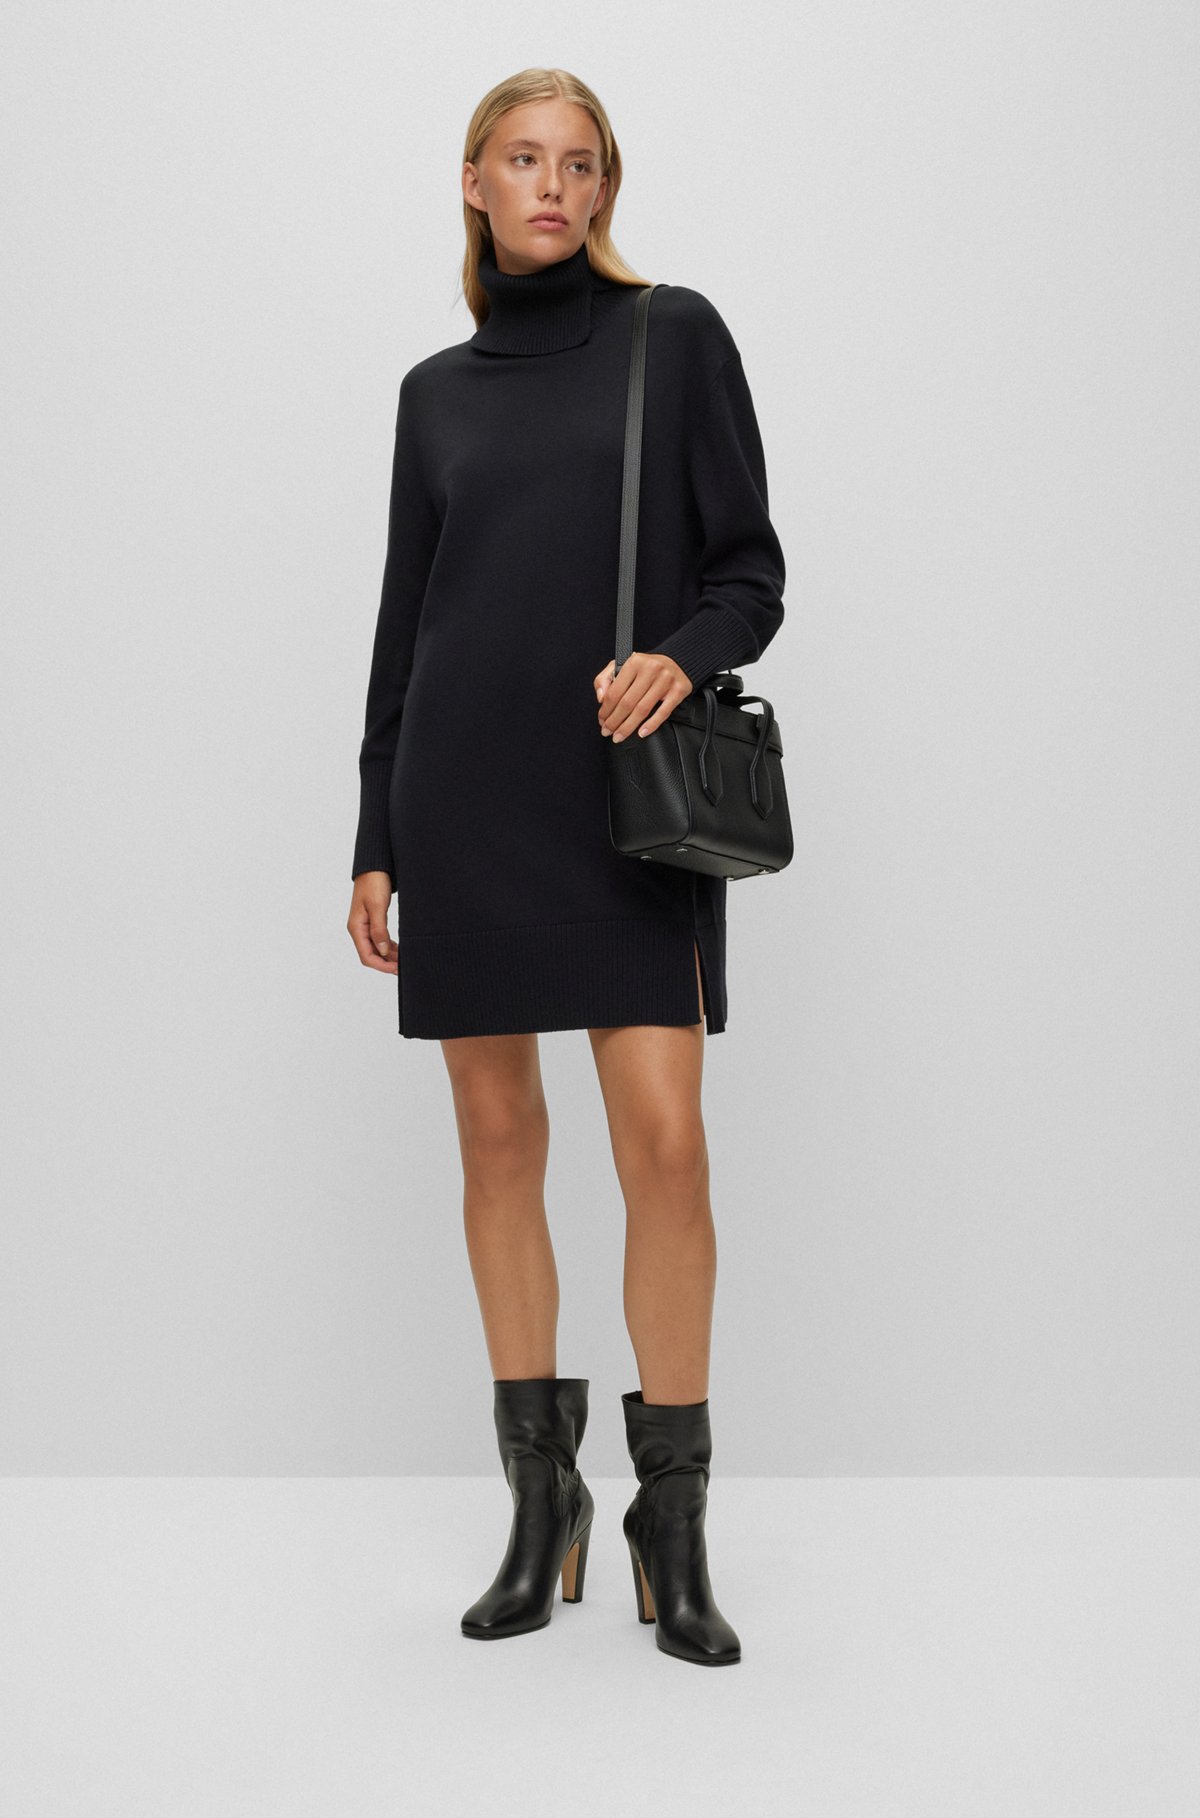 Rollneck dress in cotton and virgin wool, Black